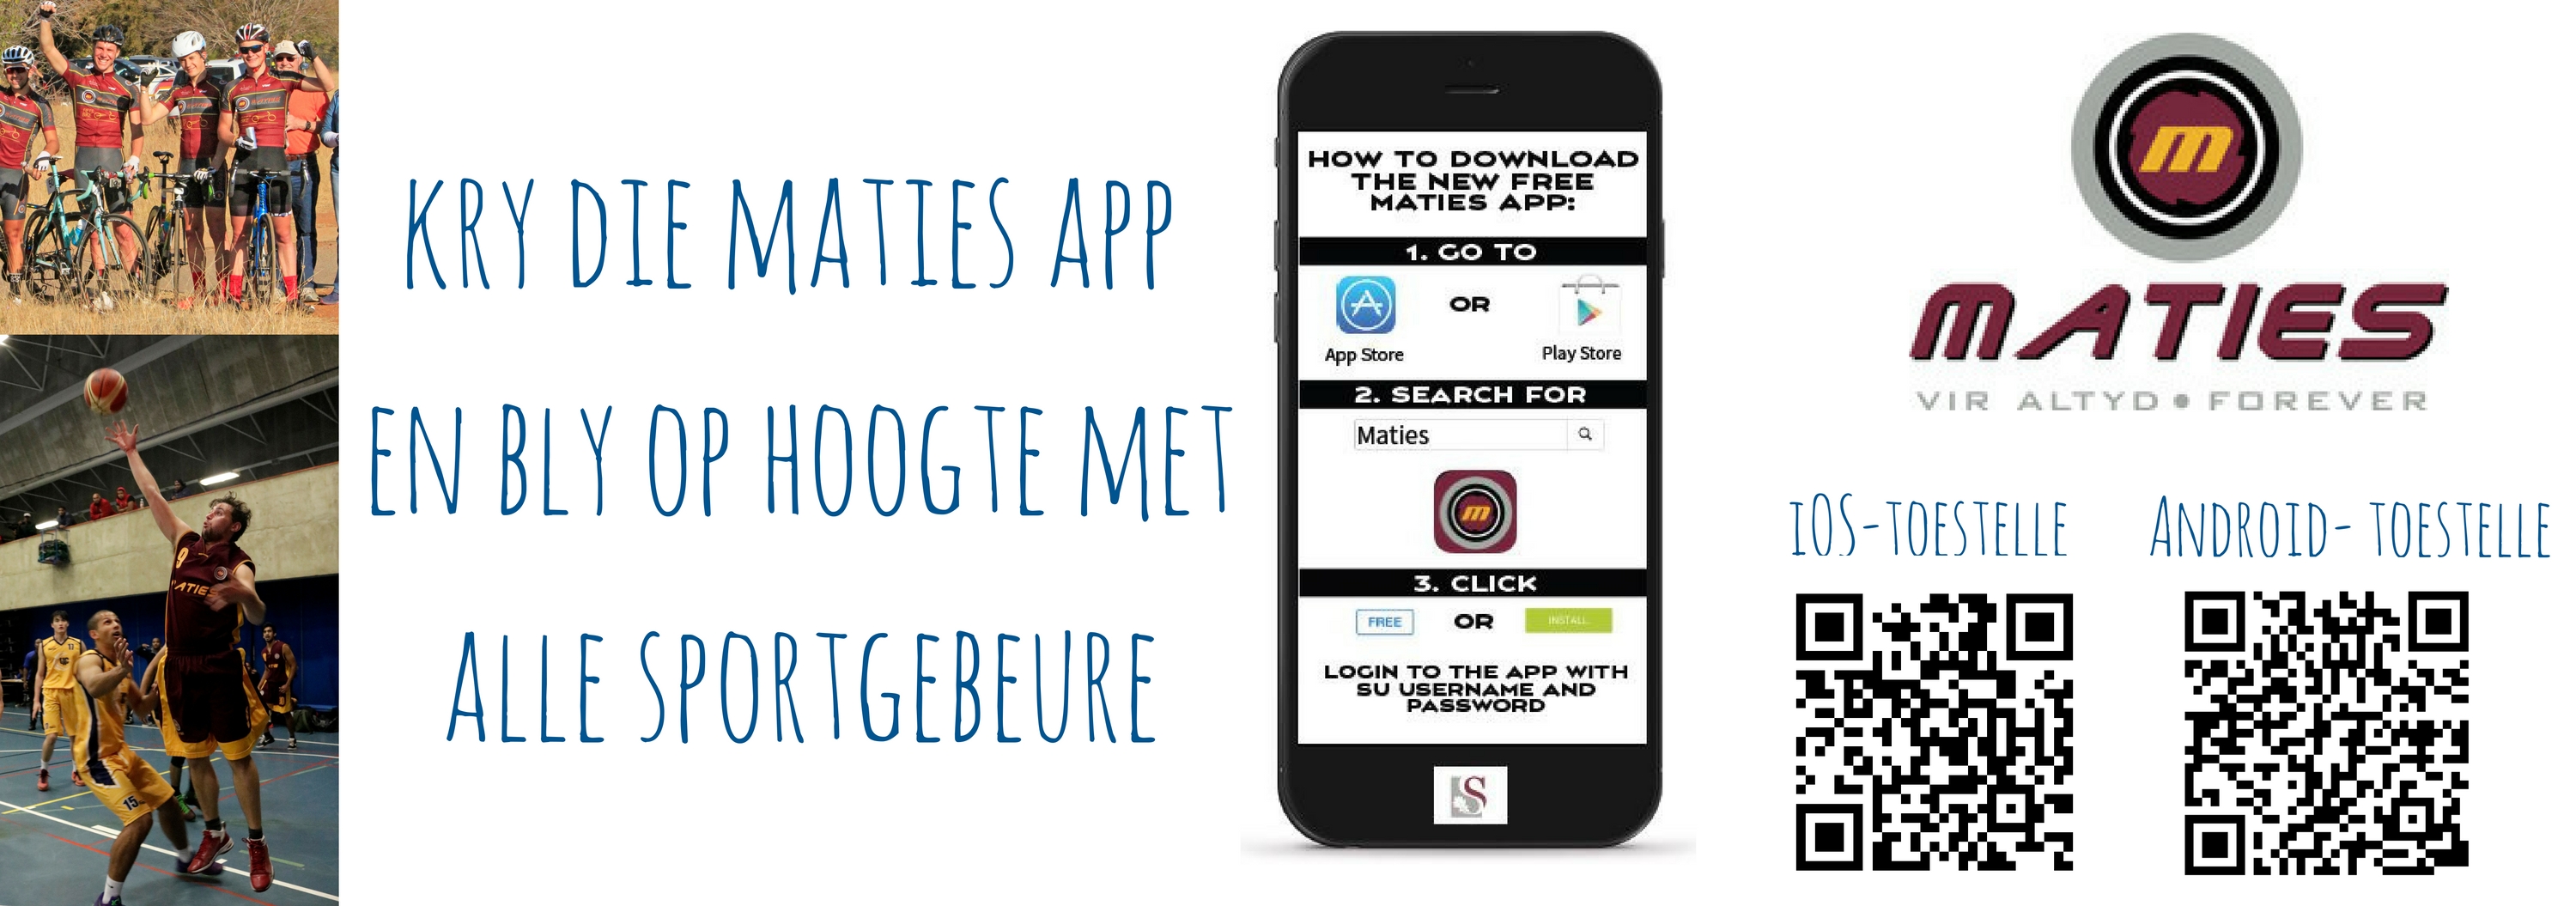 Copy of DOWNLOADTHE MATIES APP TO STAY UPDATED WITH SPORT EVENTS.jpg